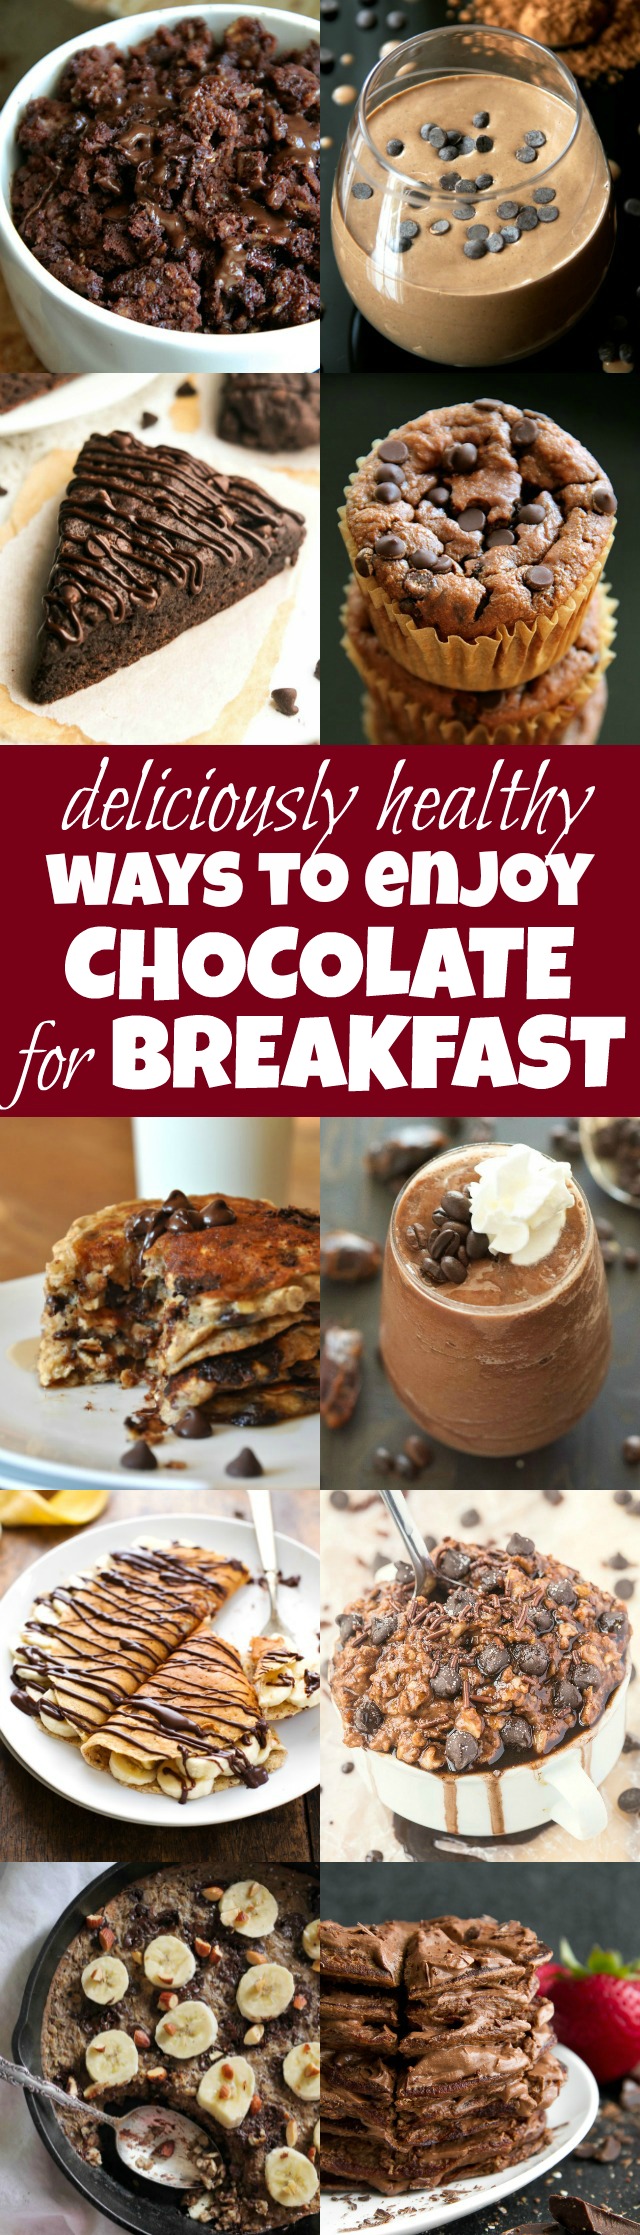 Deliciously Healthy Ways To Enjoy Chocolate for Breakfast | runningwithspoons.com